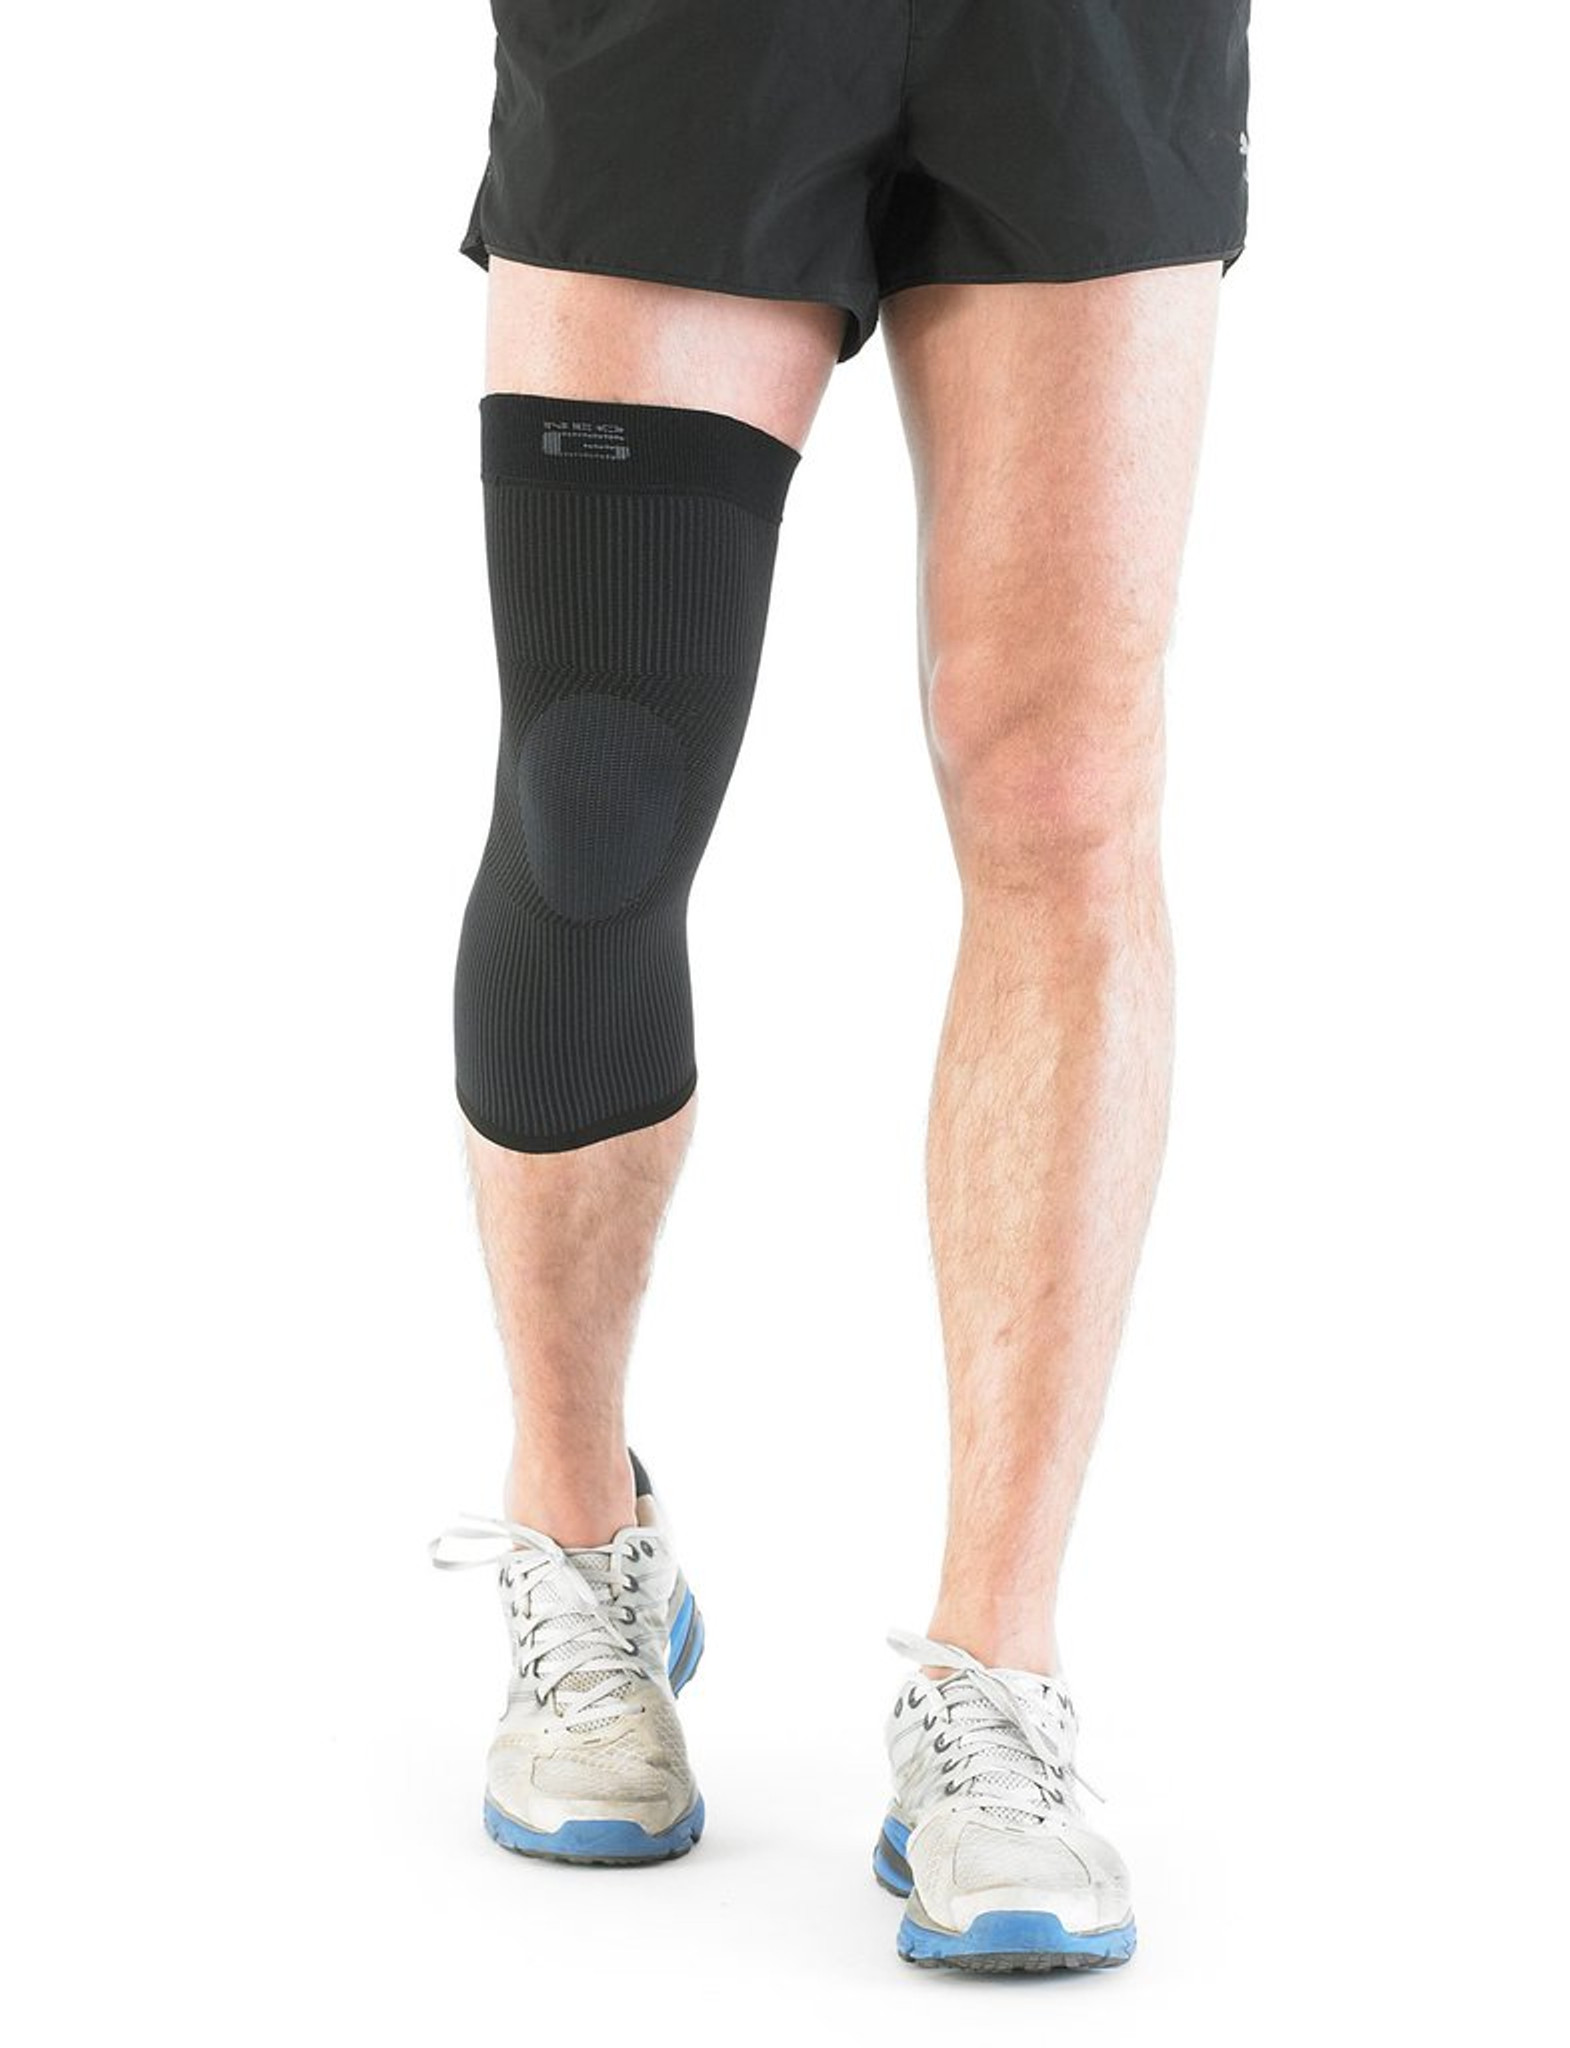 Neo G Airflow Knee Support Large: 38 - 43 cm 